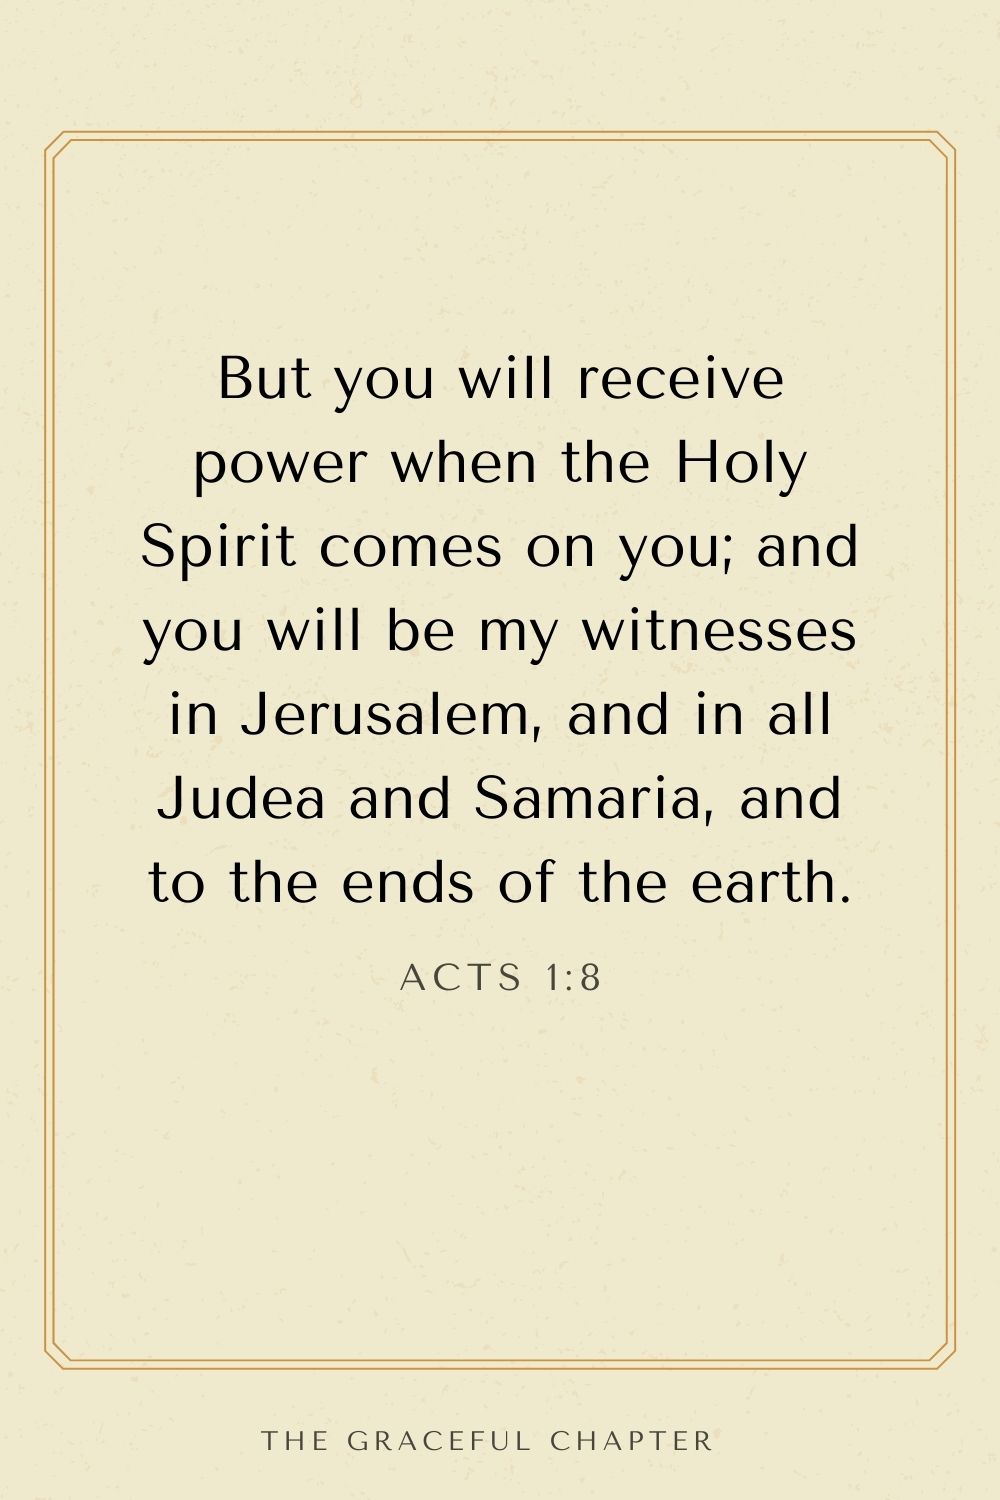 But you will receive power when the Holy Spirit comes on you; and you will be my witnesses in Jerusalem, and in all Judea and Samaria, and to the ends of the earth. Acts 1:8